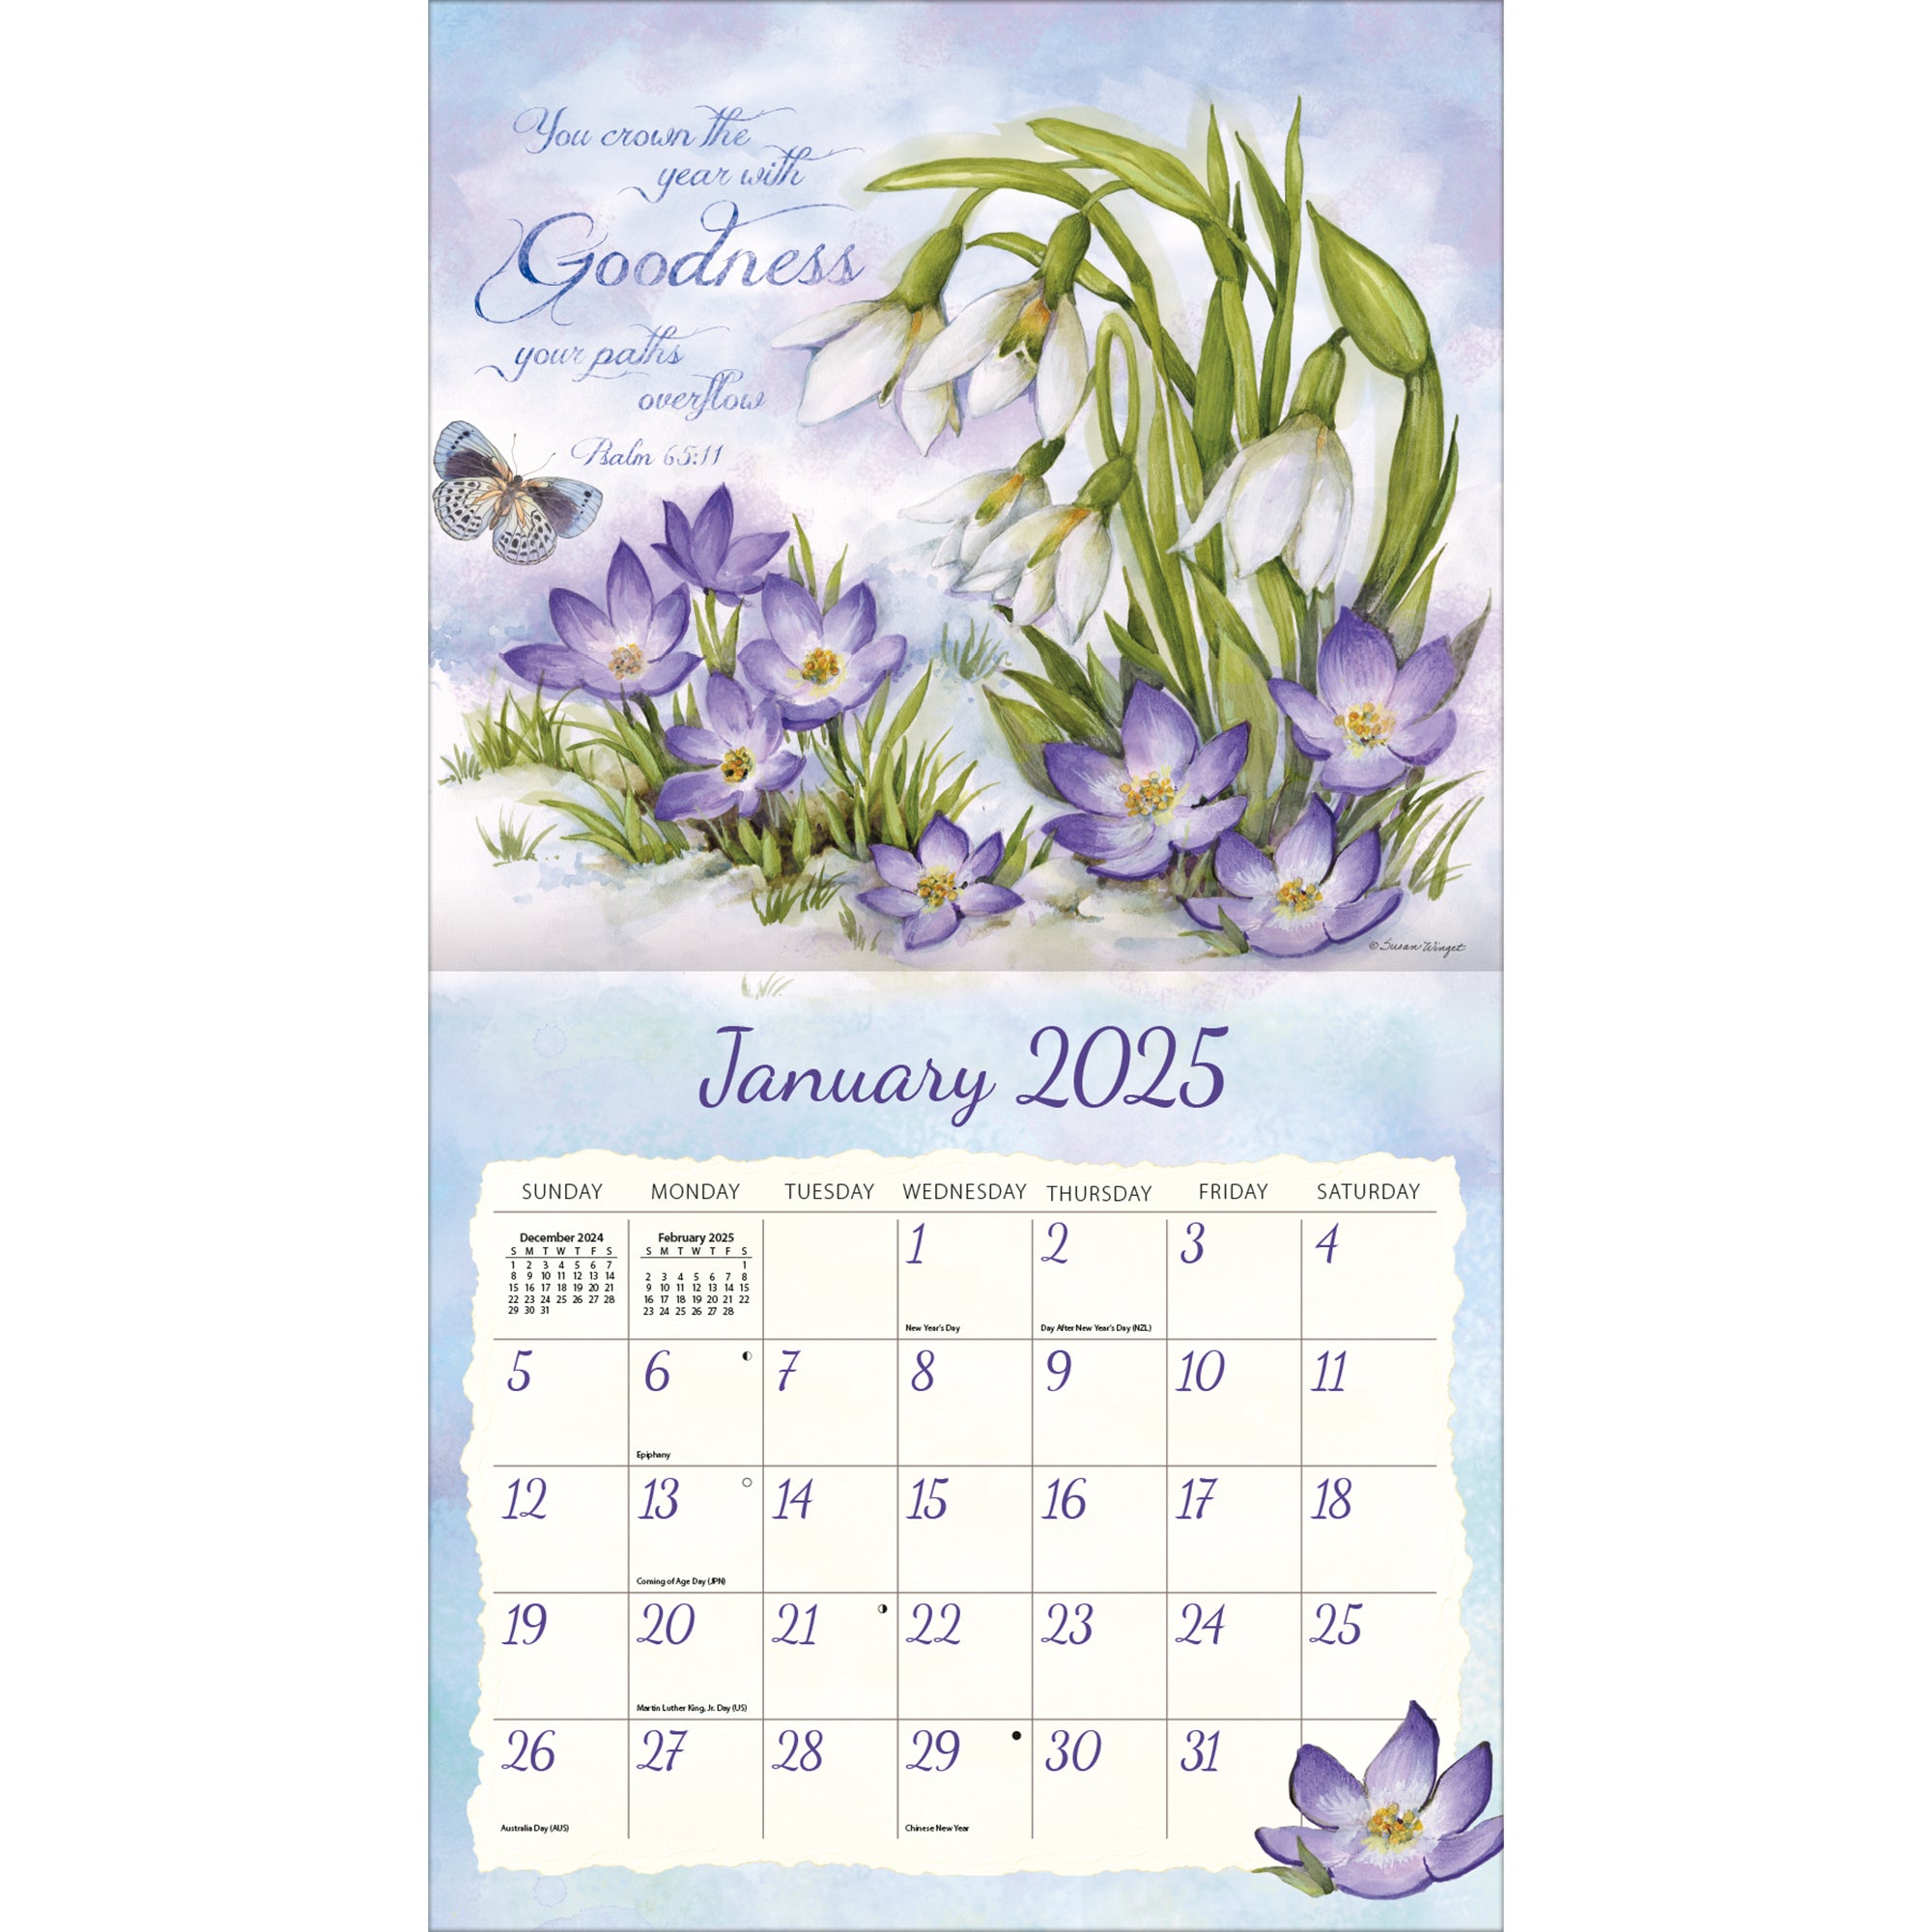 2025 LANG Nature's Grace by Susan Winget - Deluxe Wall Calendar